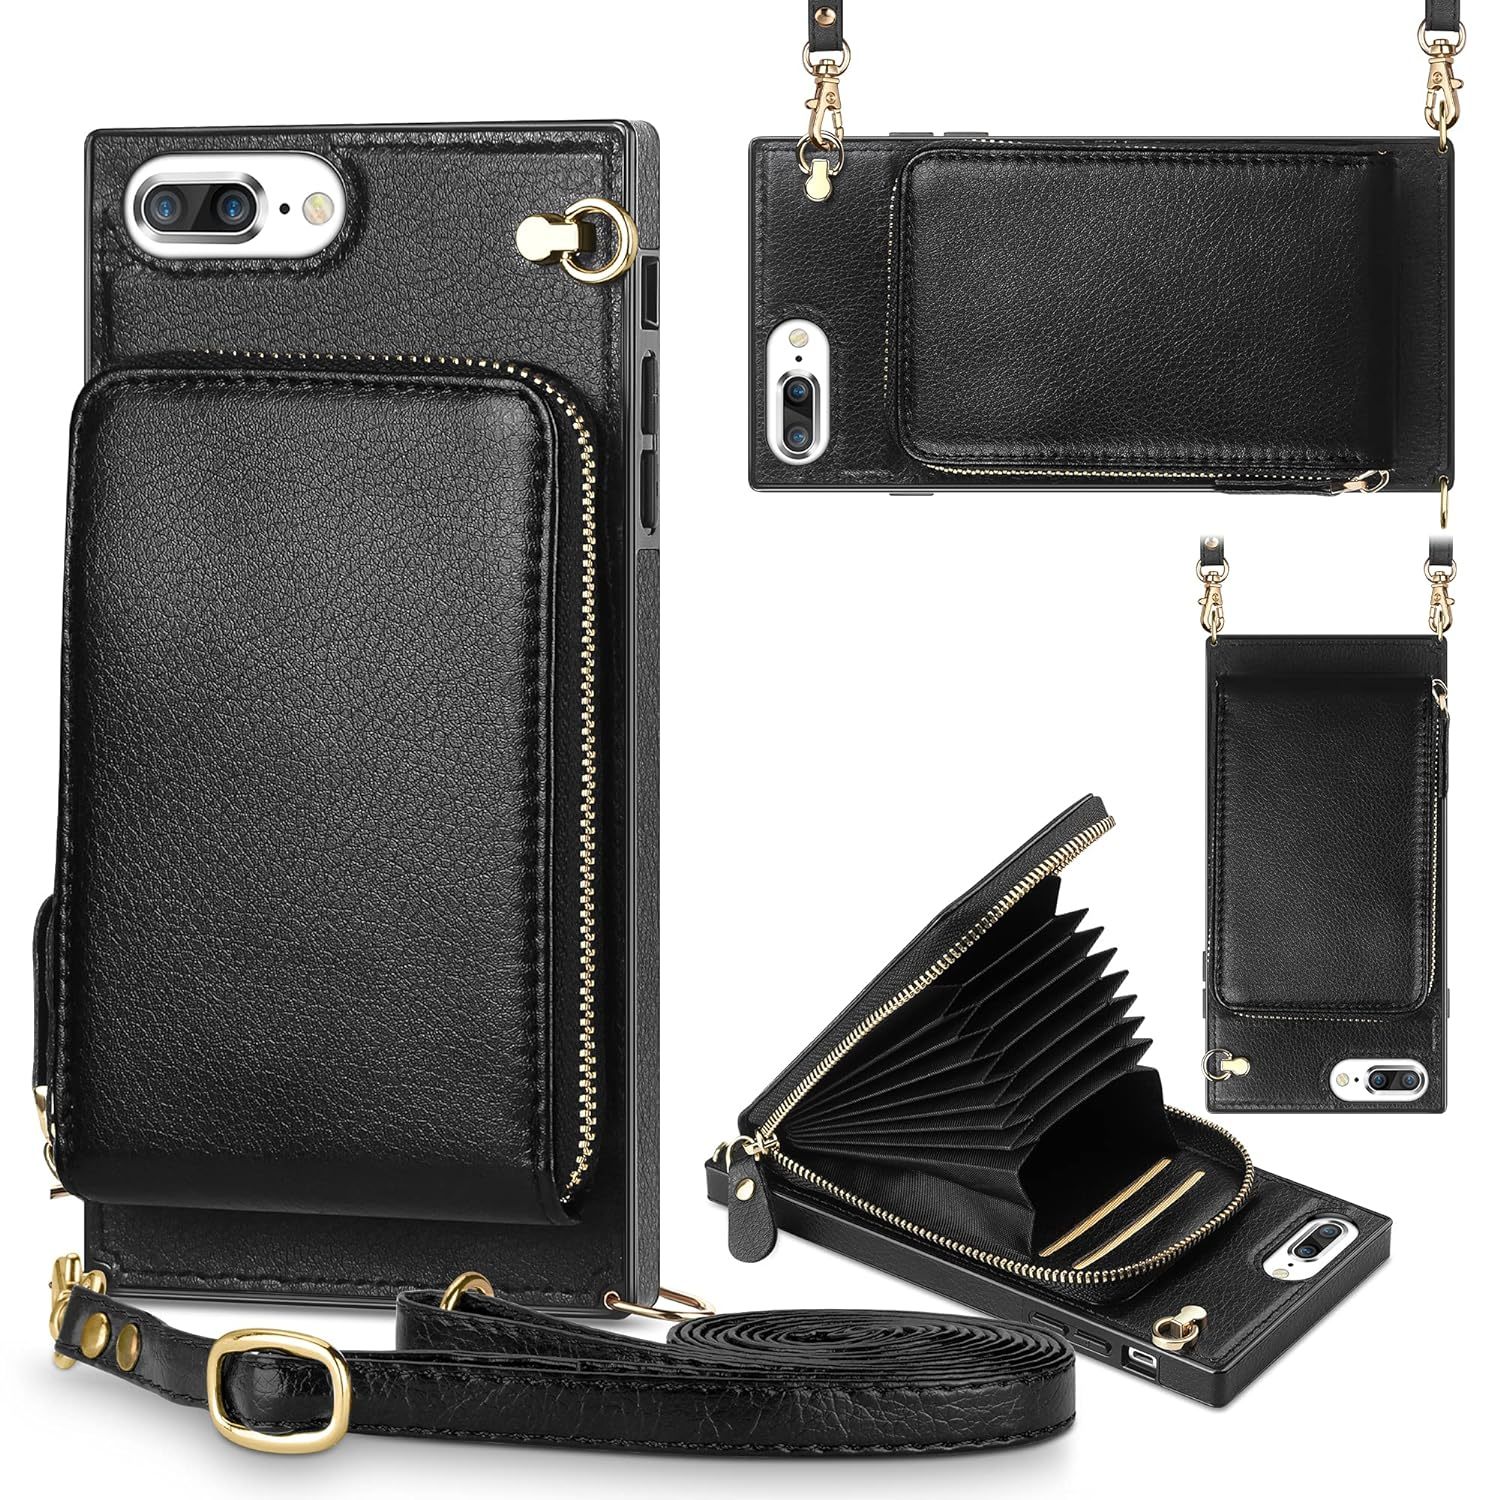 For Iphone 7 Plus Case Iphone 8 Plus Case Wallet Zipper Leather Case With Card H - $35.99